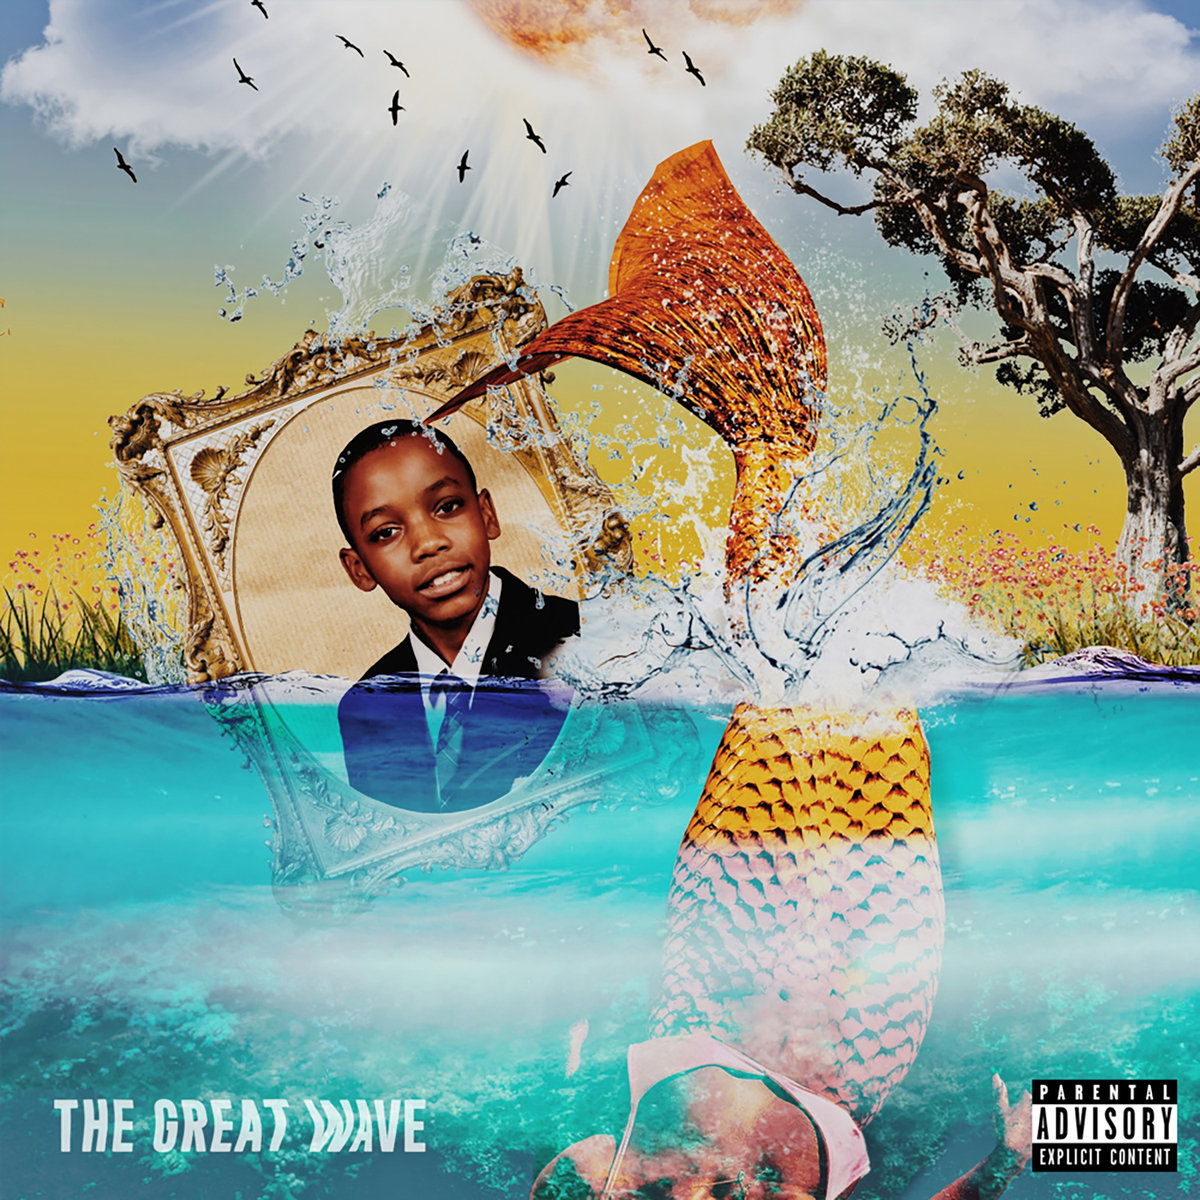 The_great_wave__scienze